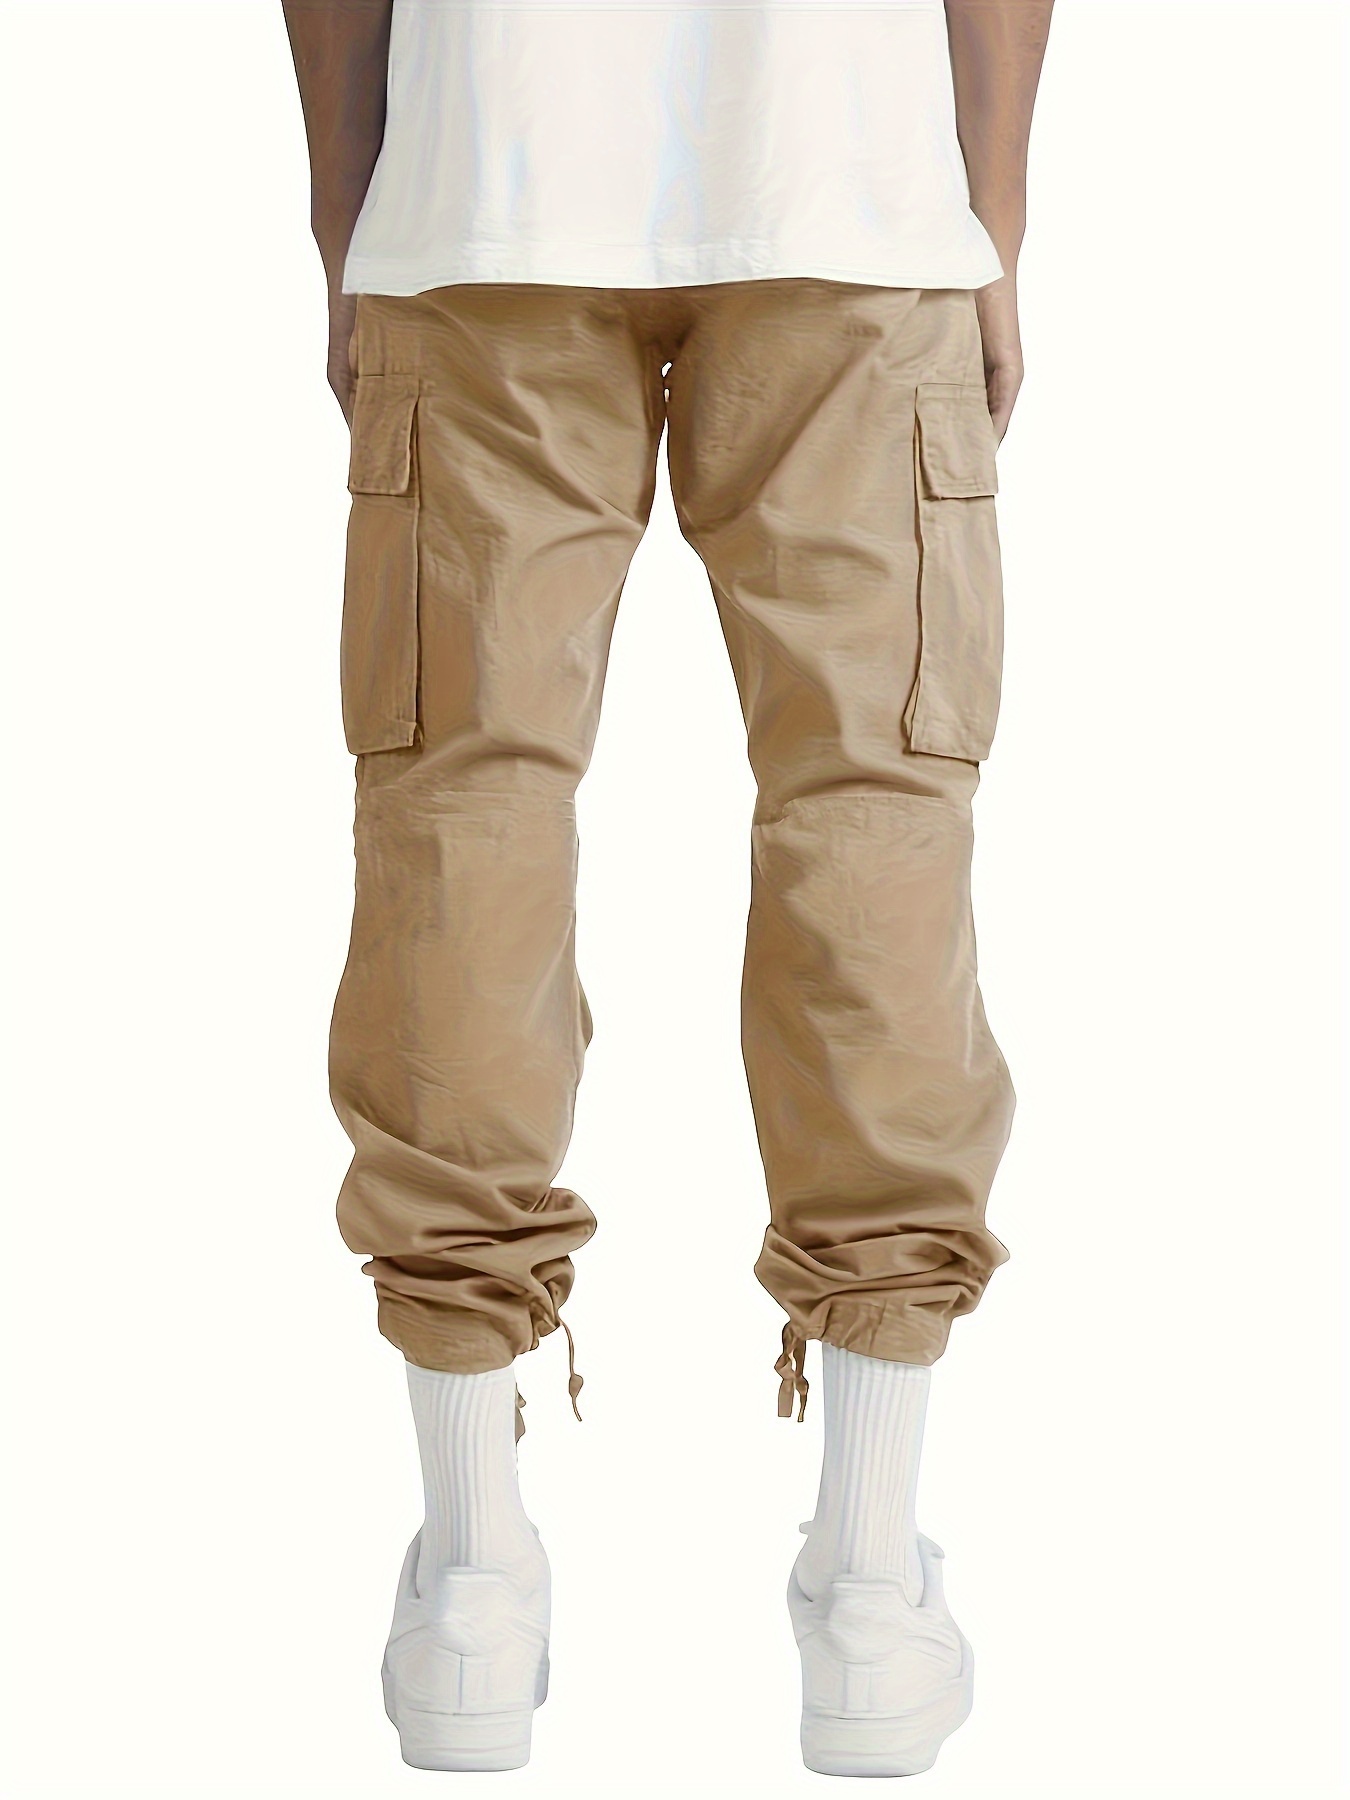 Mens Baggy Cargo Pants Casual Lightweight Hiking Fishing Trousers  Drawstring Outdoor Relaxed Fit Slacks Cargo Pants